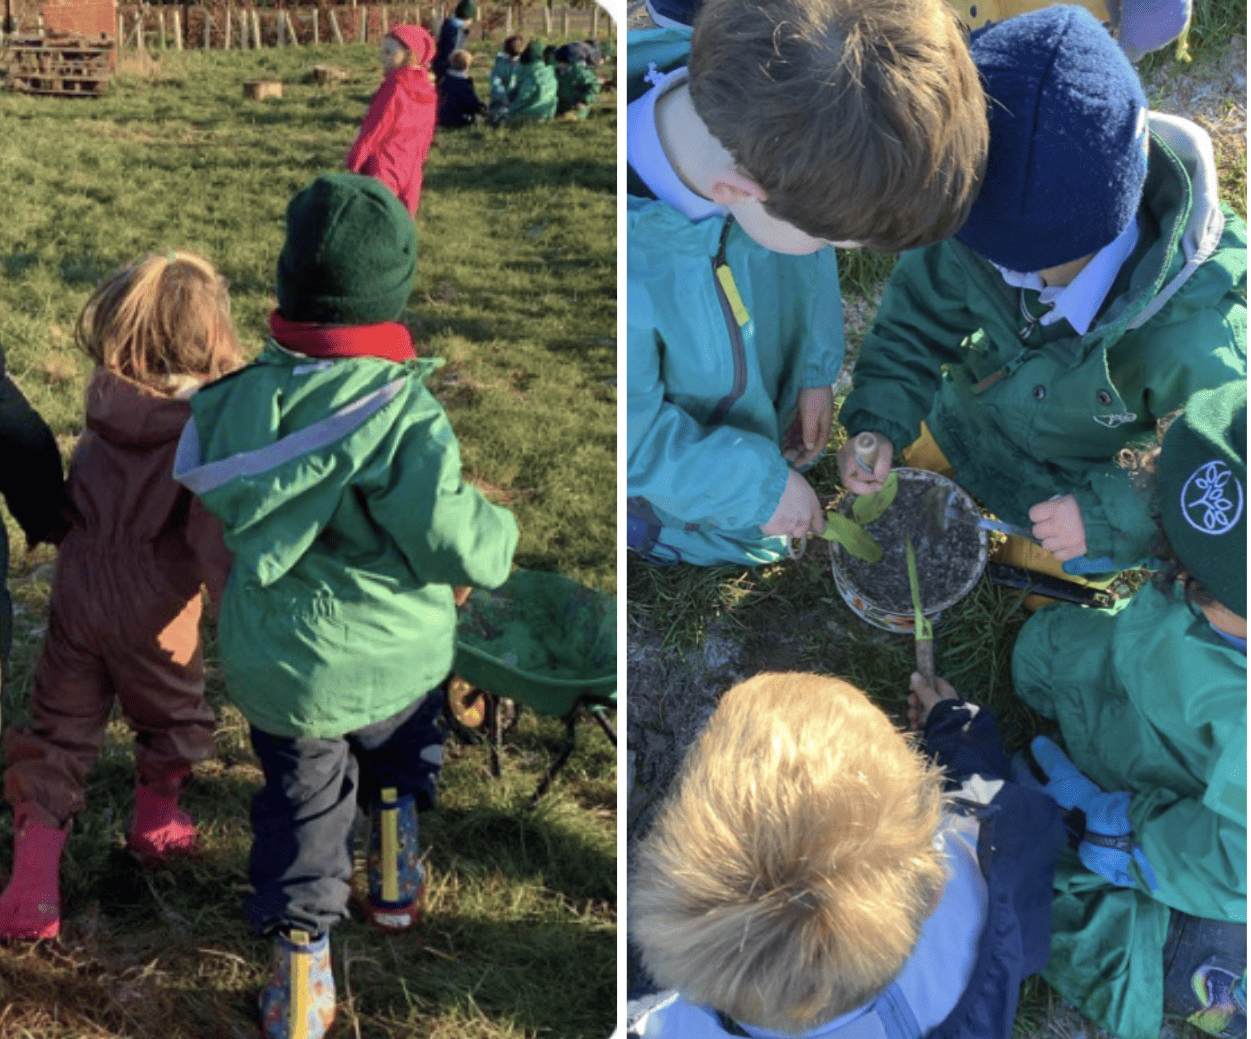 Pupils playing with a wheelbarrow and taking part in forest school activities.